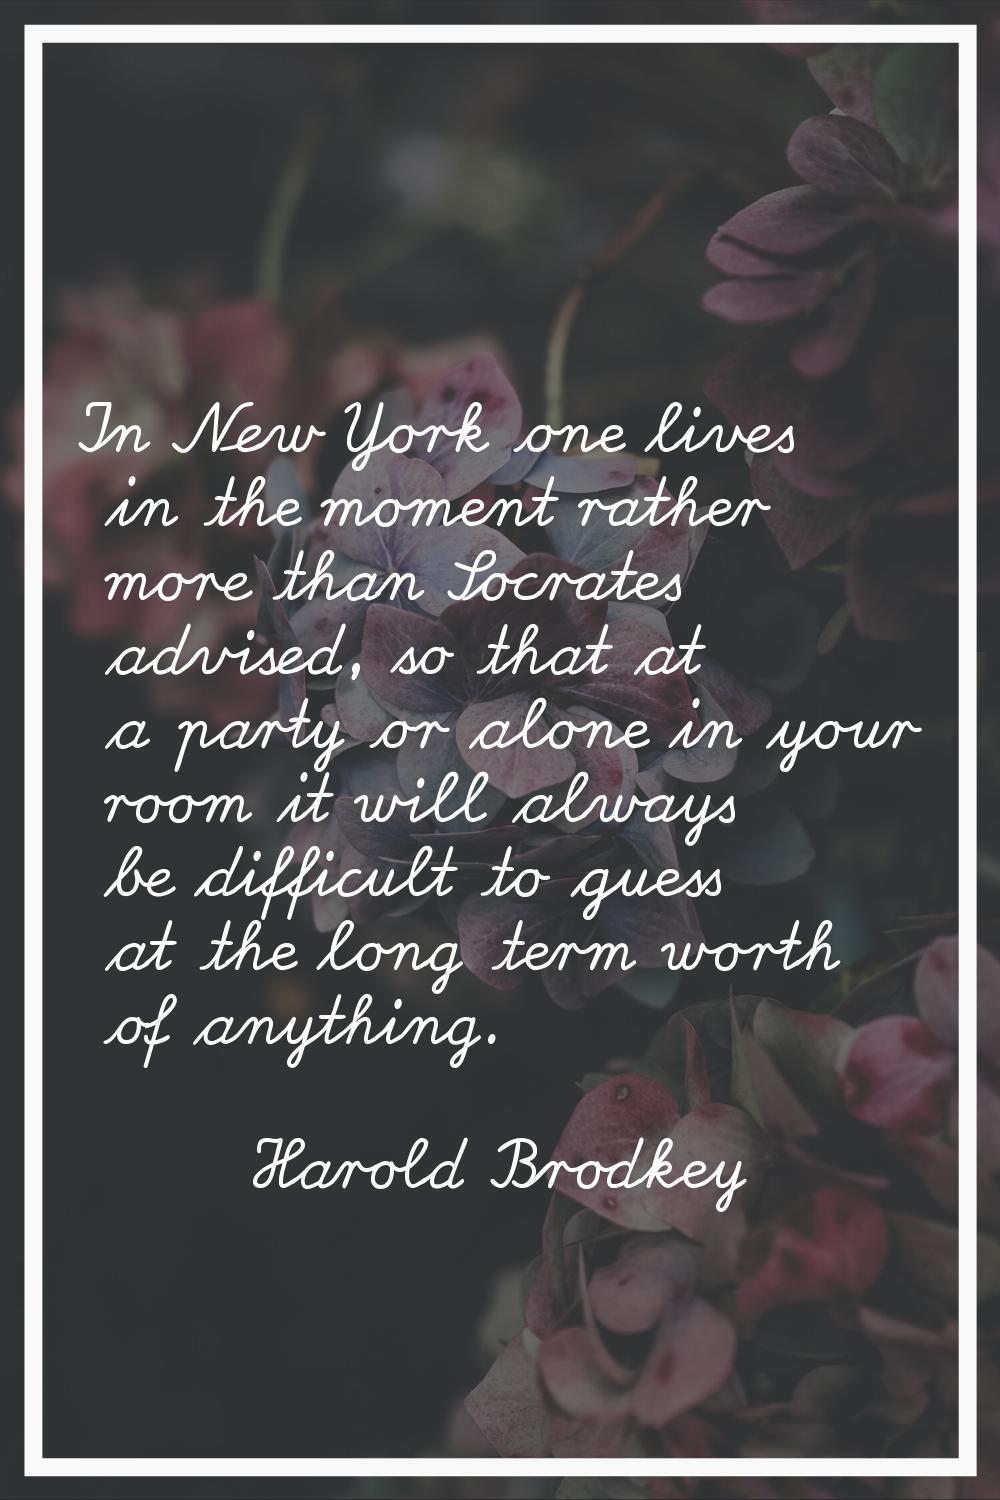 In New York one lives in the moment rather more than Socrates advised, so that at a party or alone 